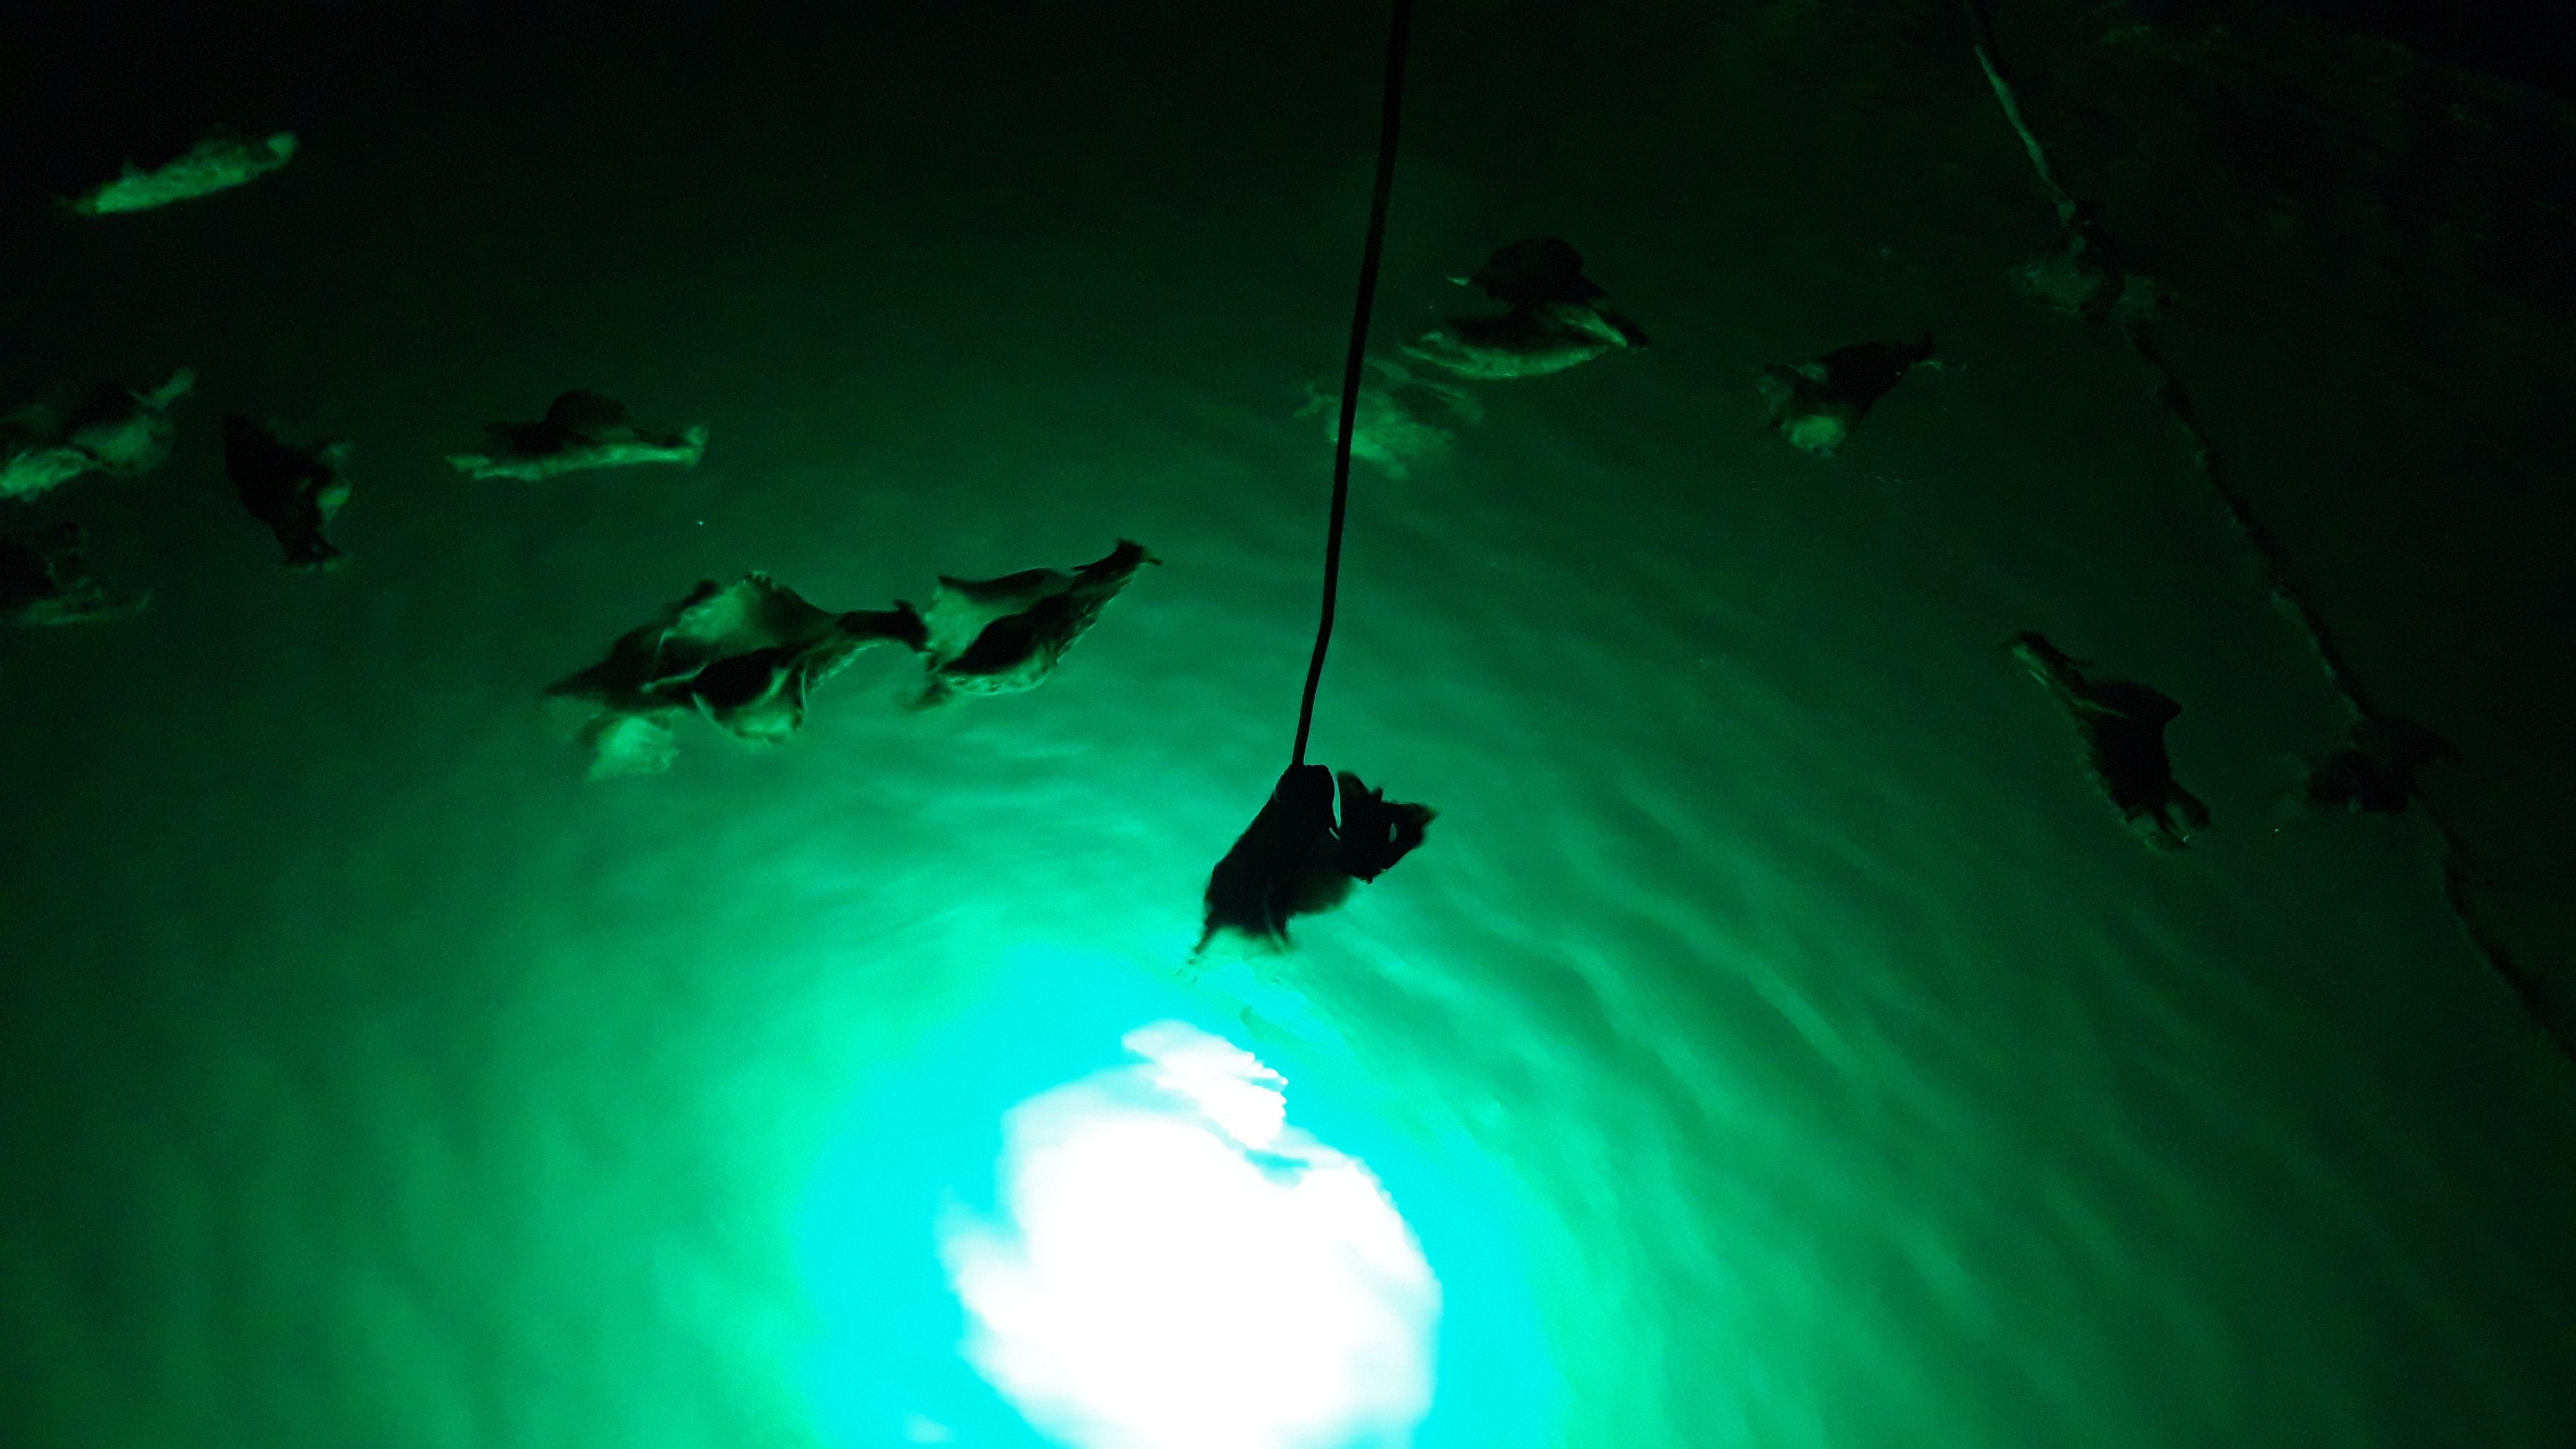 Green Blob 15000 Lumen LED Underwater Fishing Light - Texas-Made, Durable  for Saltwater & Freshwater, Available in Green, Blue, or White